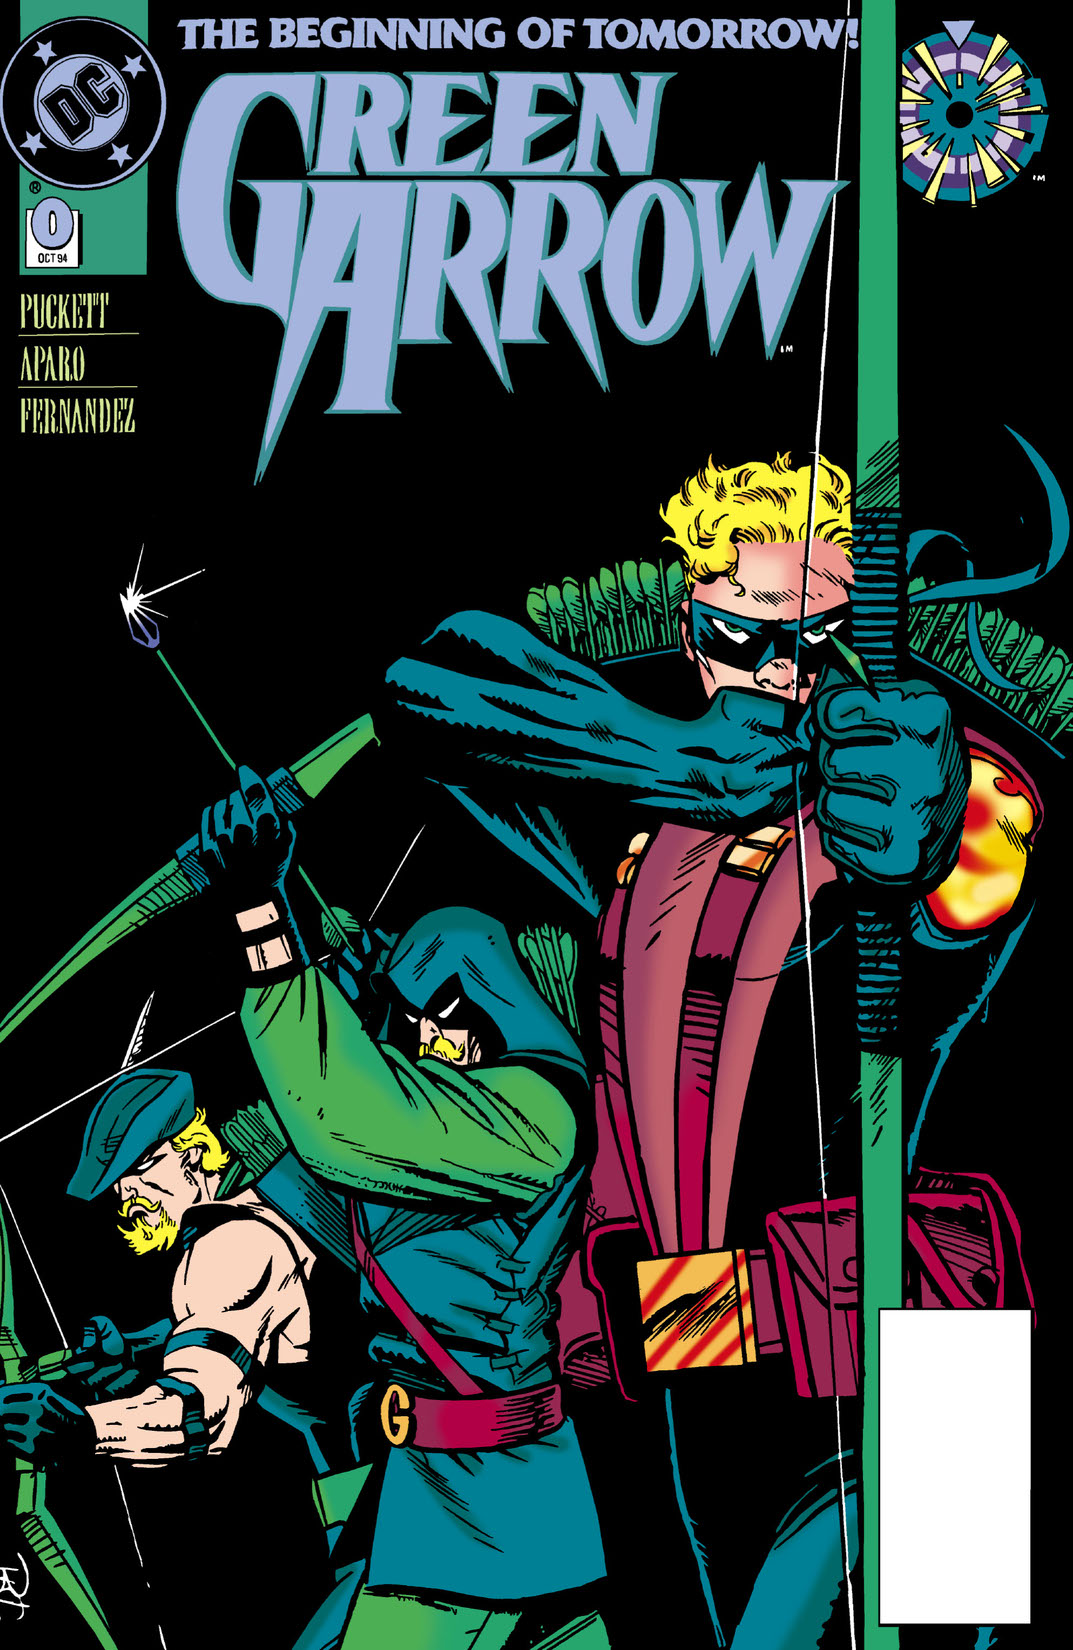 Green Arrow (1987-1998) #0 preview images